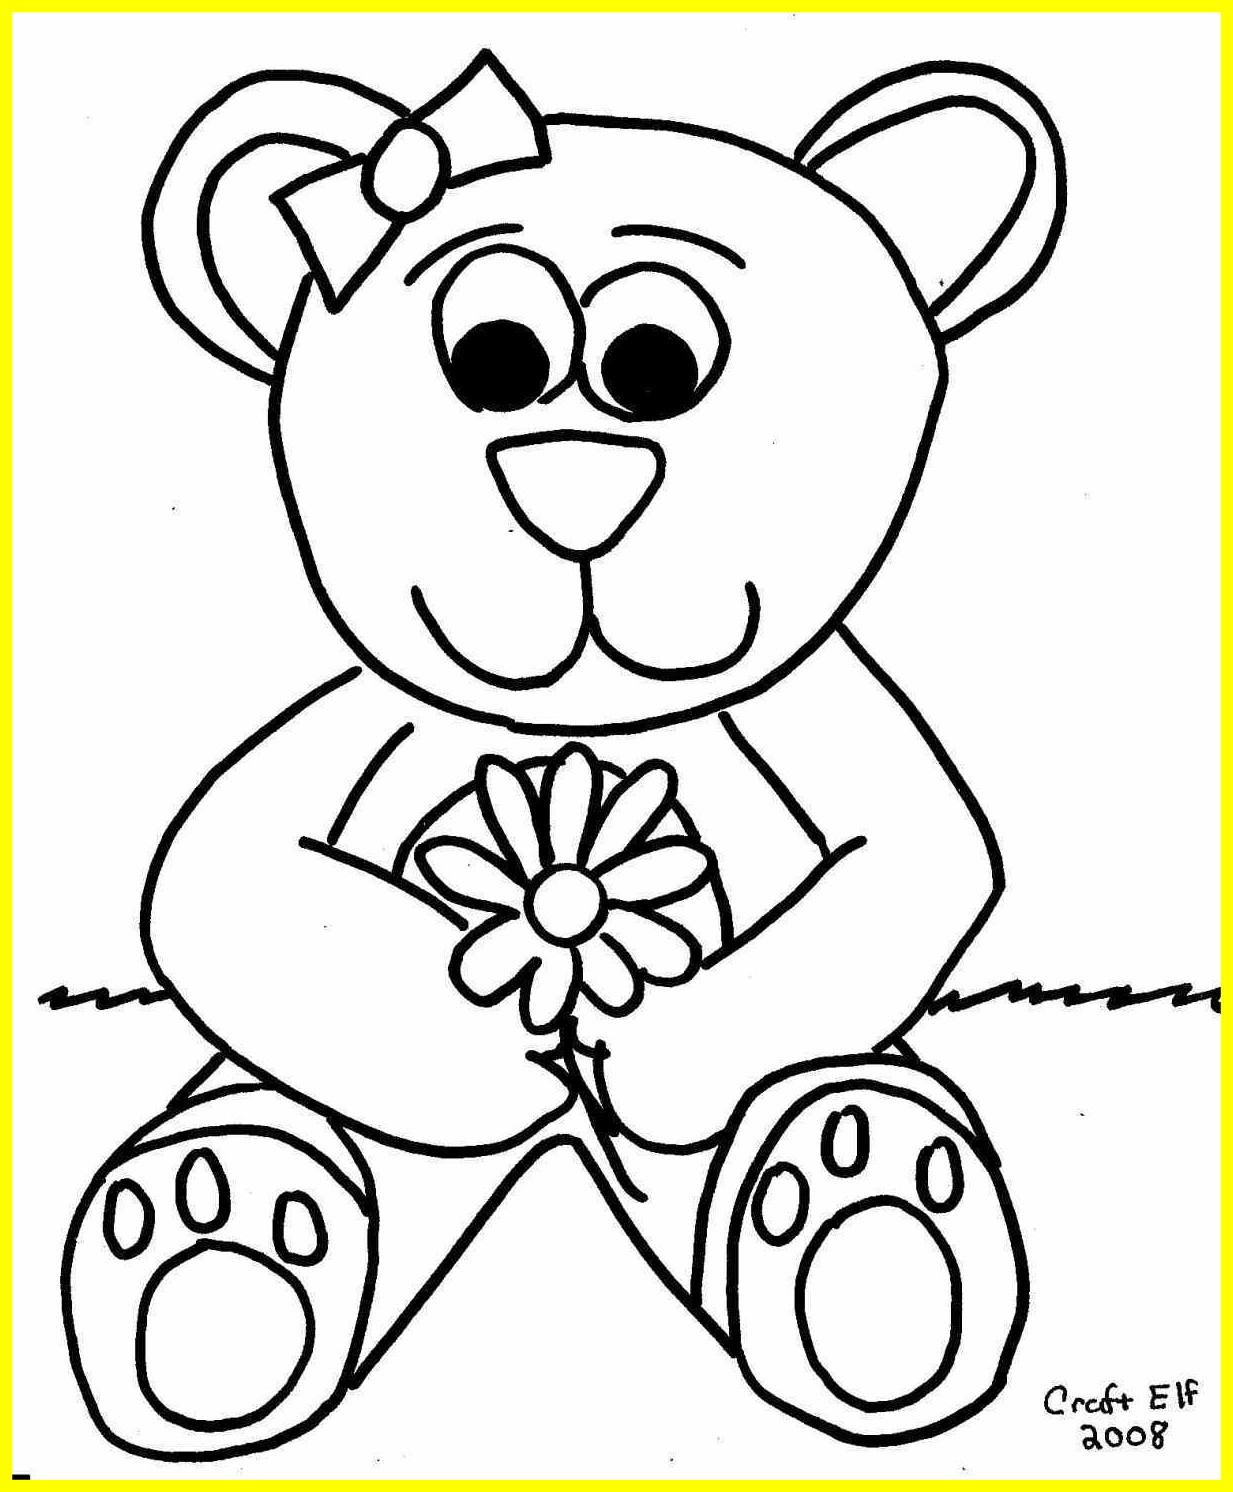 Teddy Bear Coloring Pages For Kids at GetColorings.com | Free printable